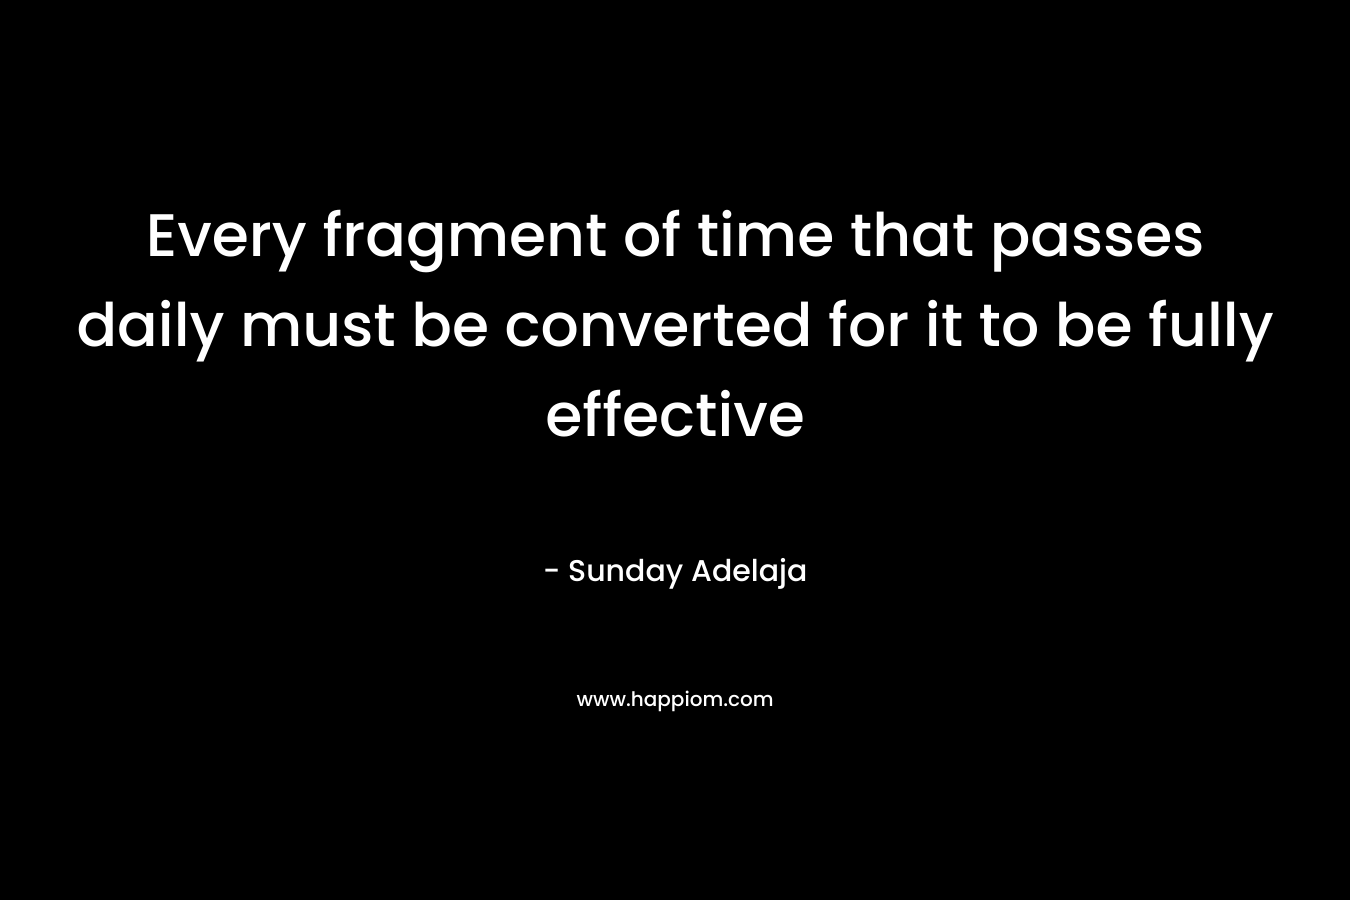 Every fragment of time that passes daily must be converted for it to be fully effective